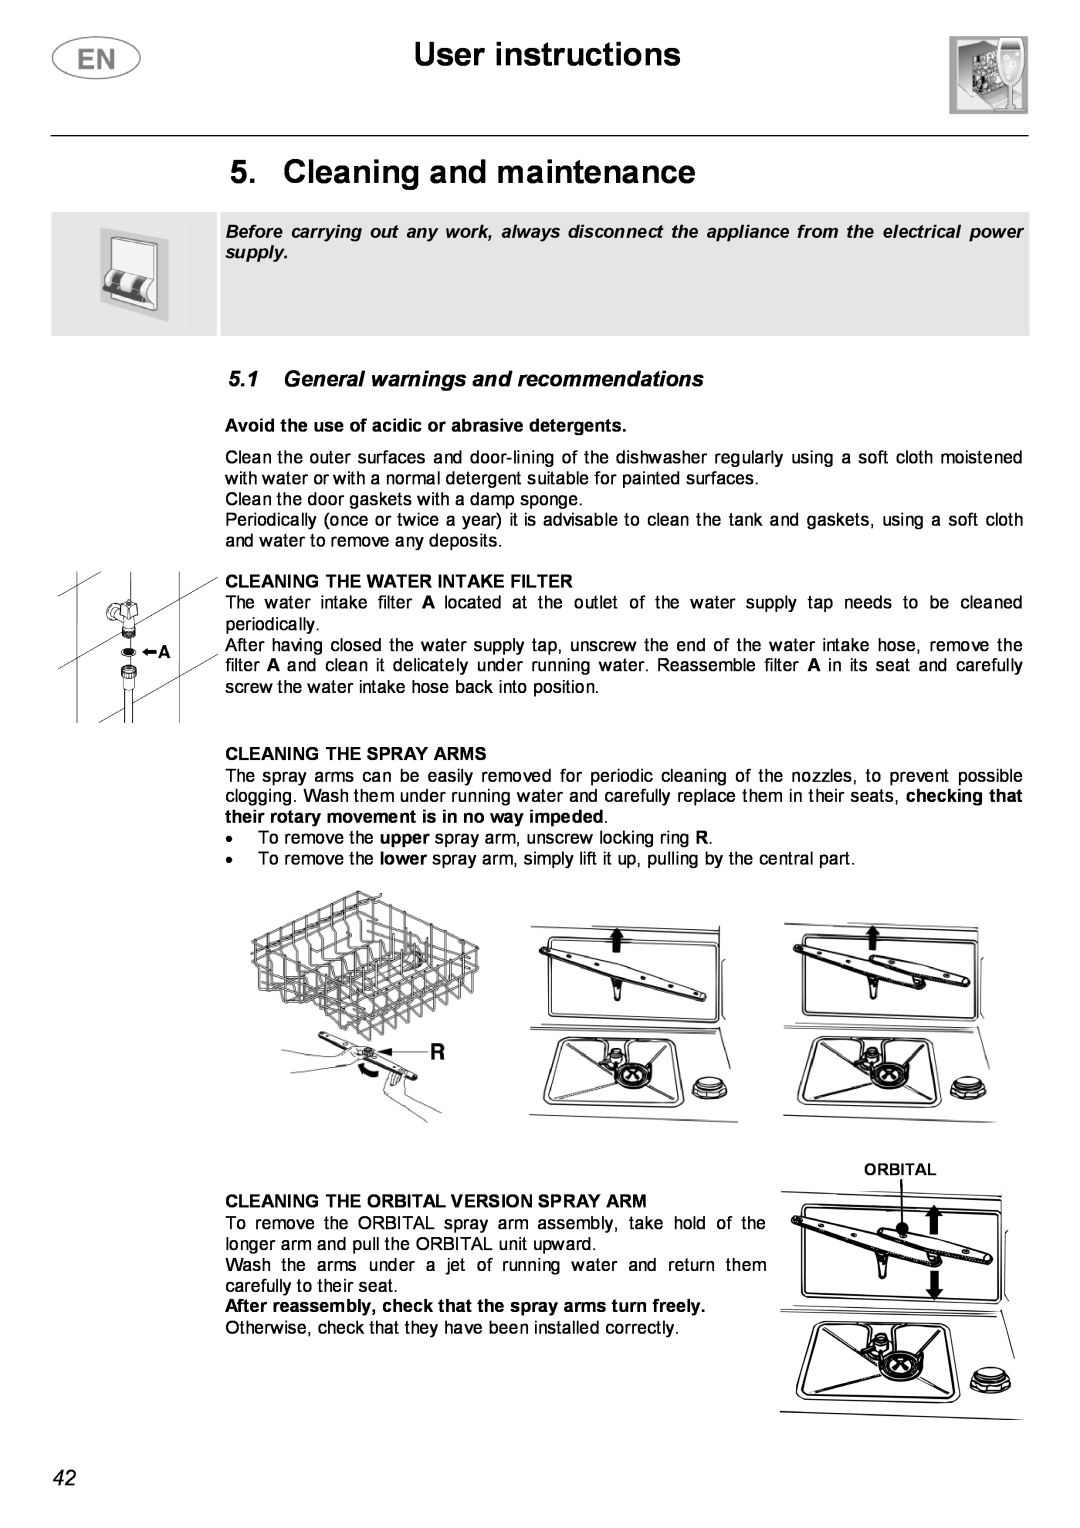 Smeg PL19K User instructions 5. Cleaning and maintenance, General warnings and recommendations, Cleaning The Spray Arms 